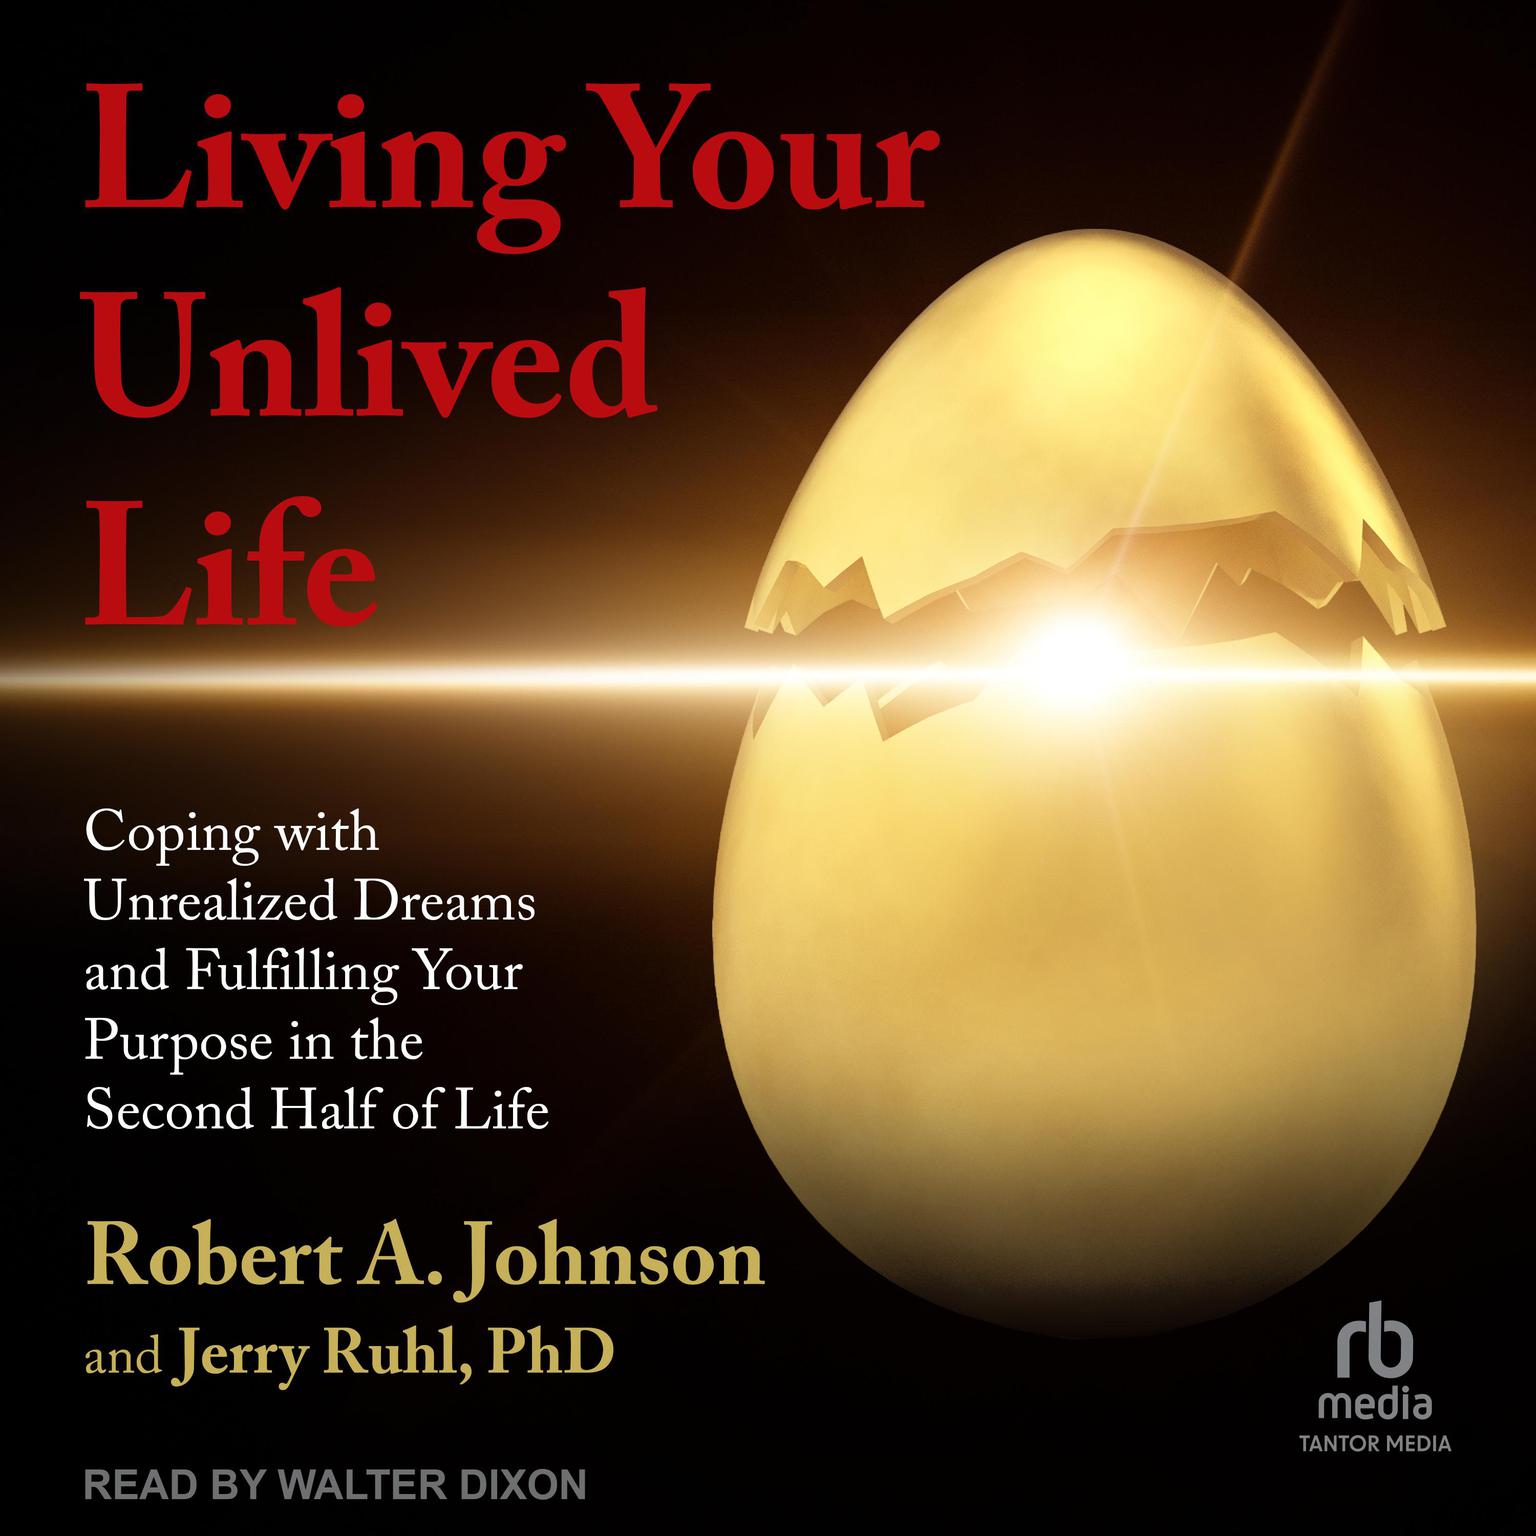 Living Your Unlived Life: Coping with Unrealized Dreams and Fulfilling Your Purpose in the Second Half of Life Audiobook, by Robert A. Johnson